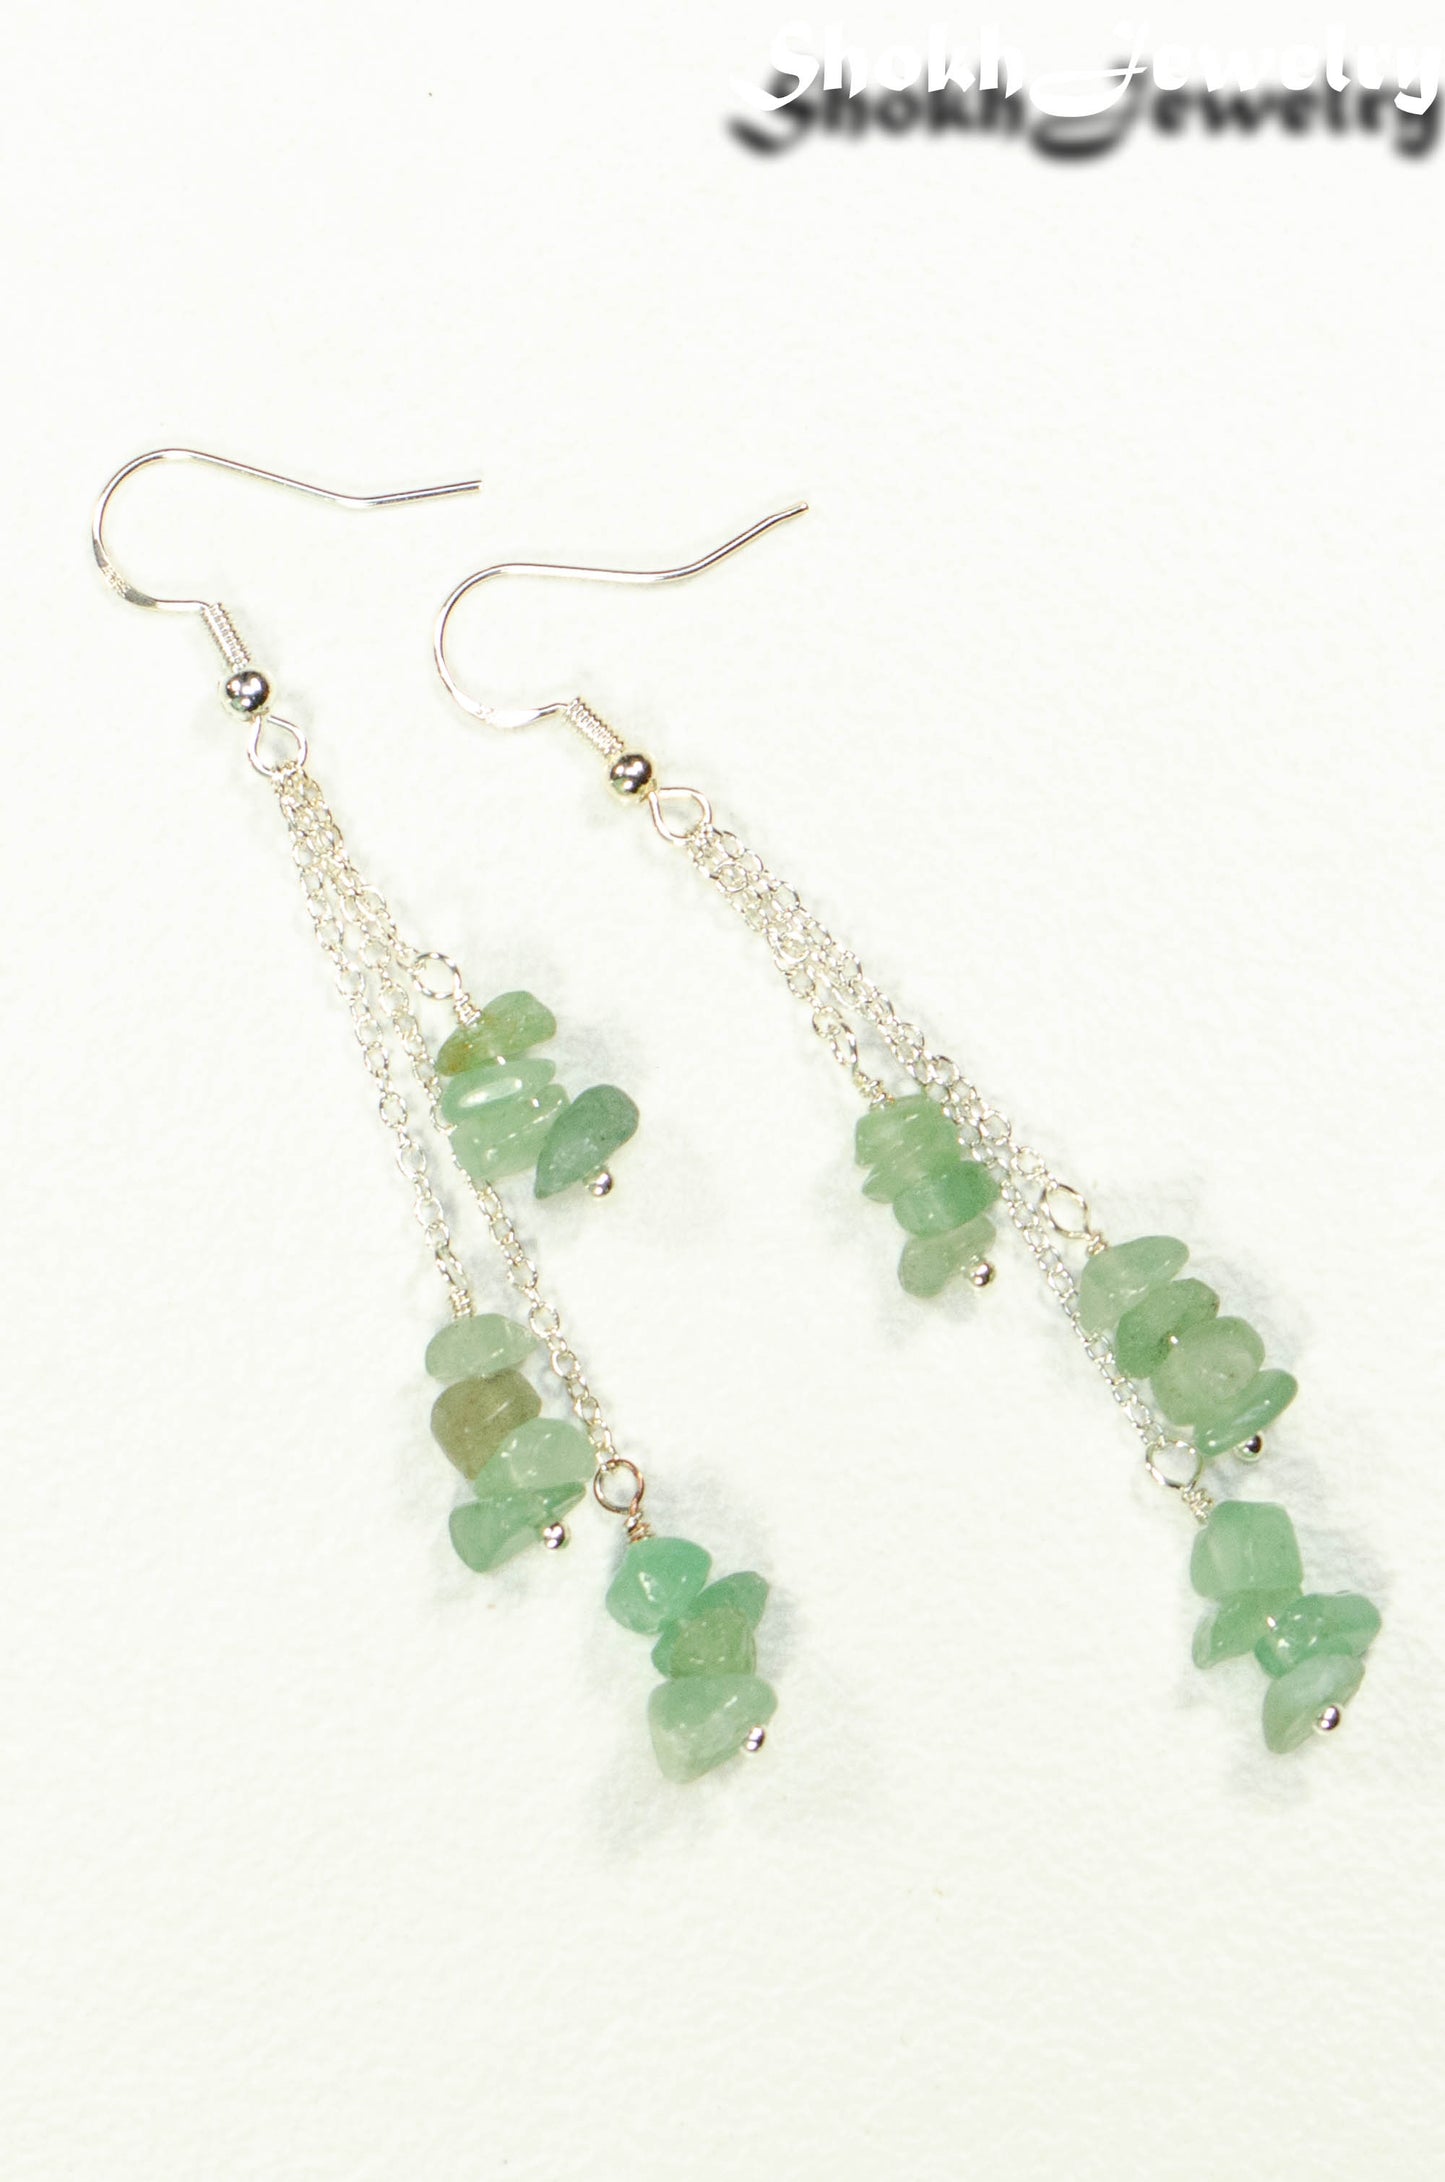 Long Silver Plated Chain and Green Aventurine Crystal Chip Earrings